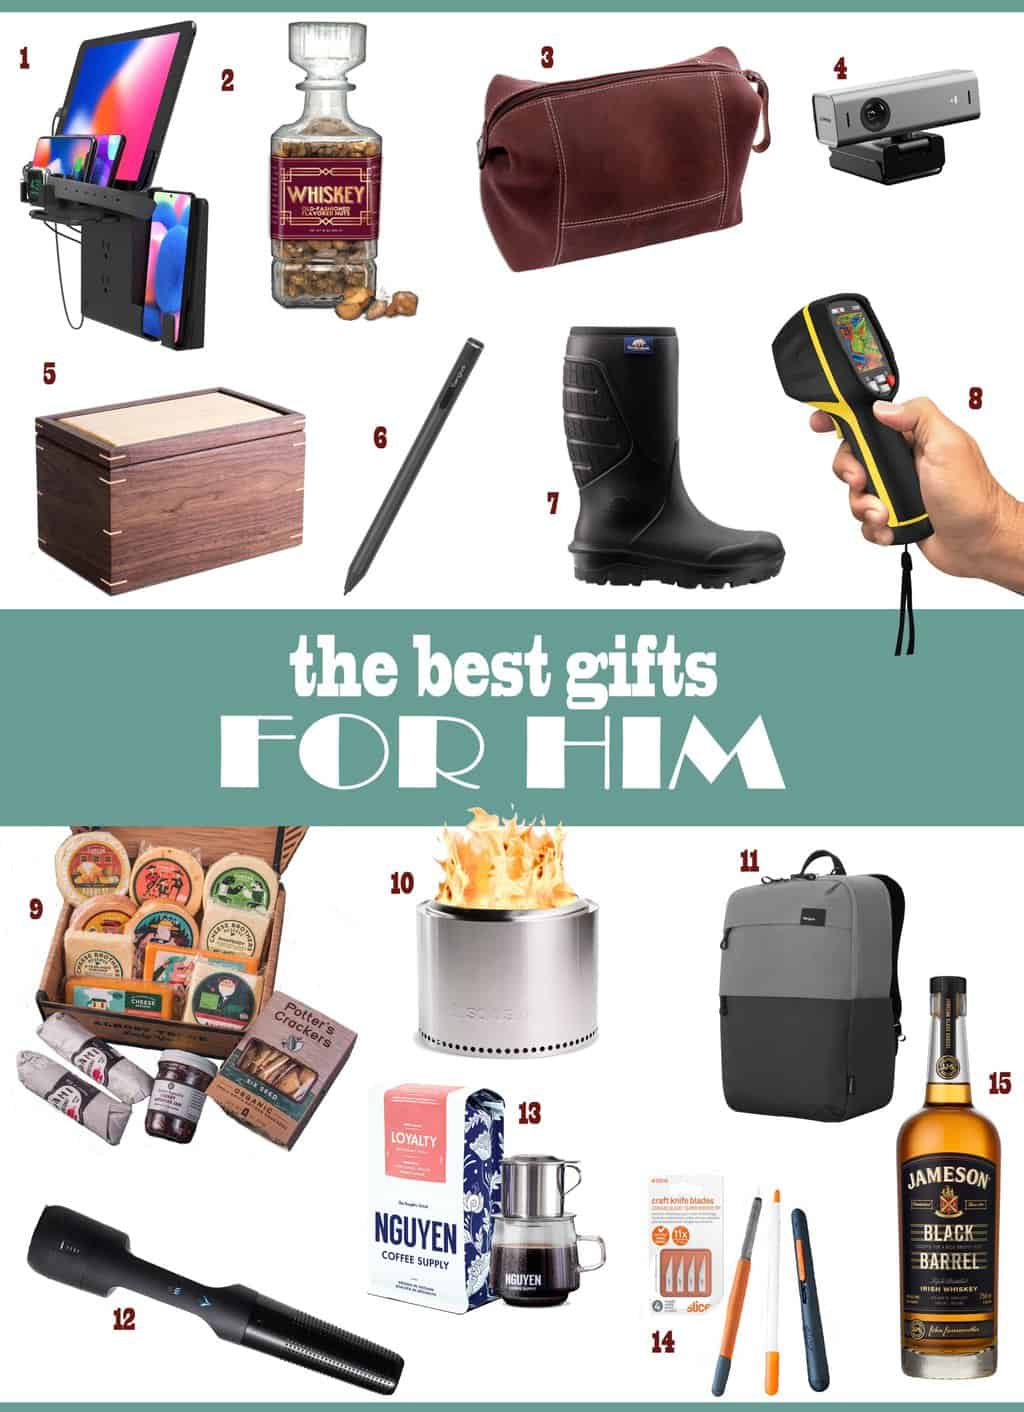 Cool Christmas Gifts for Men - Holiday Gift Guide for Hi